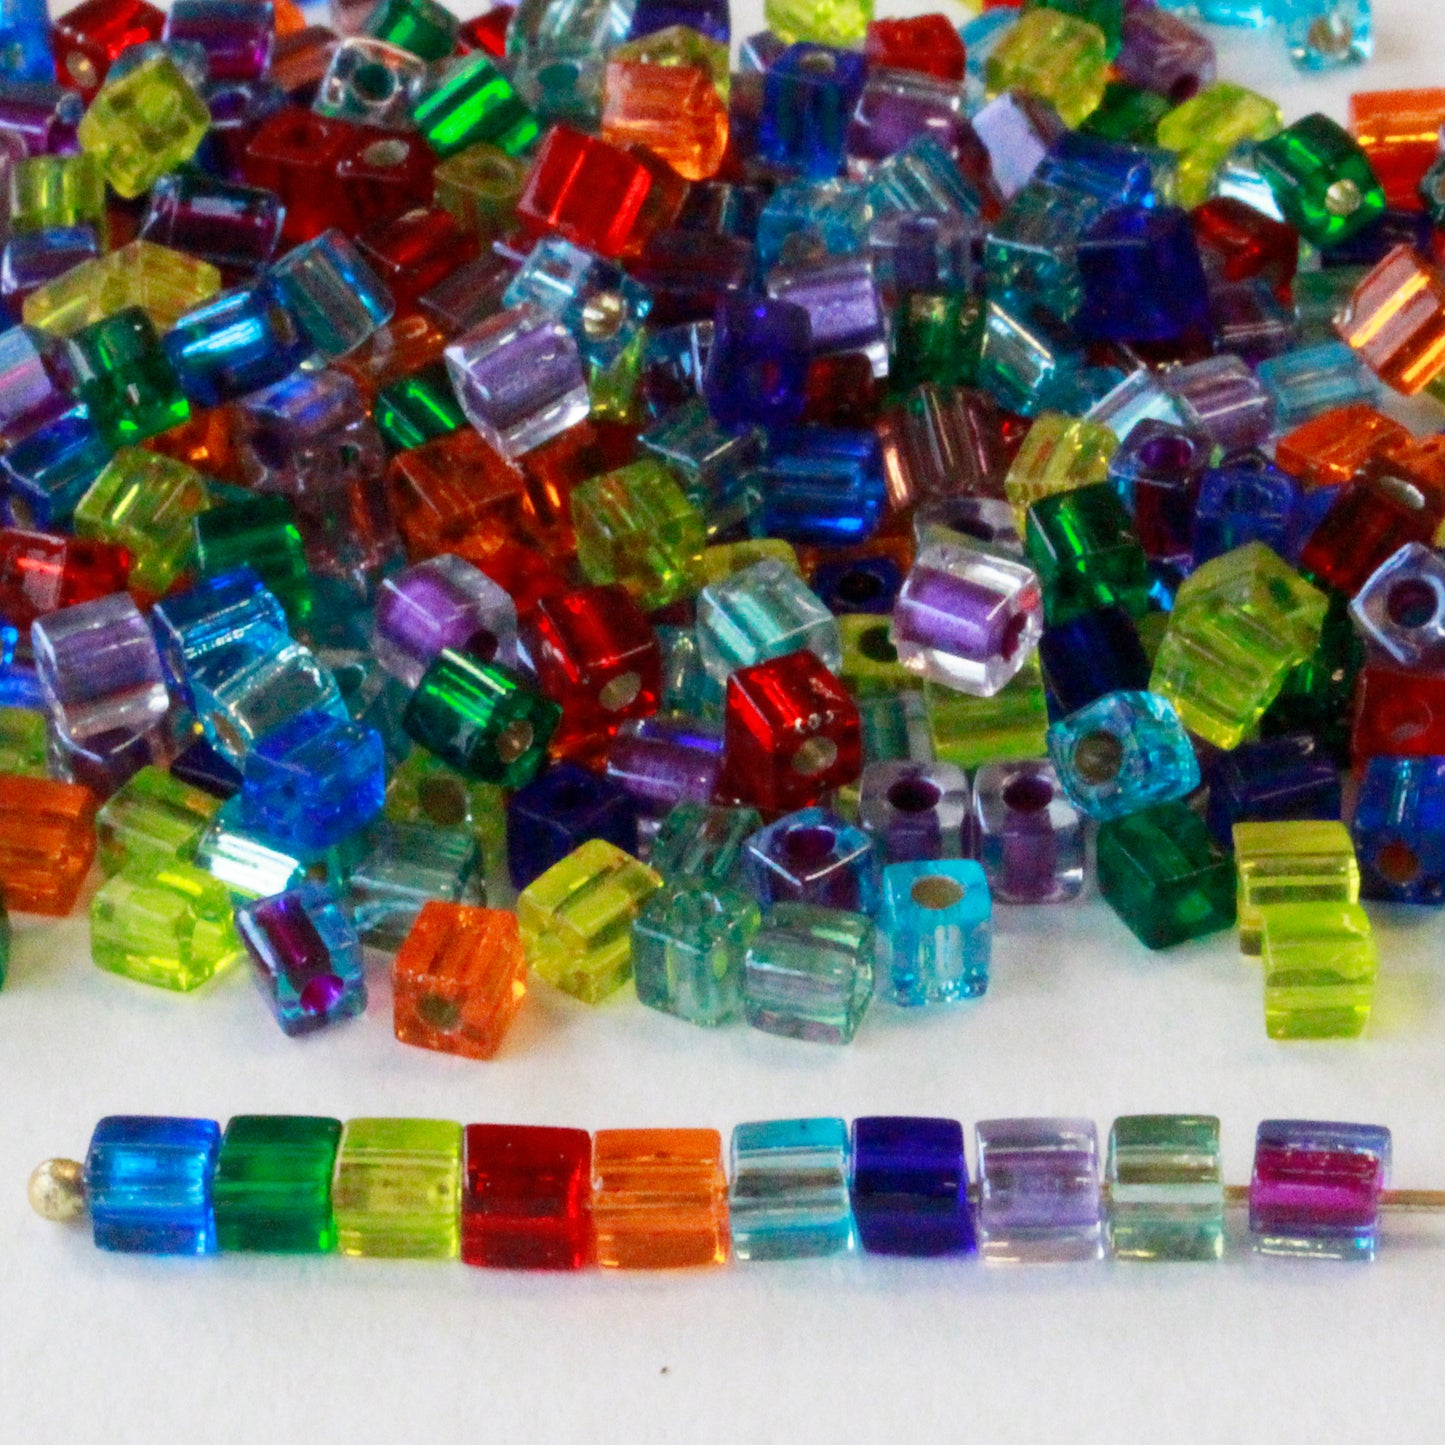  Honbay 100G(73pcs) Beautiful Acrylic Bow Beads for Jewelry  Making or DIY Crafts - Assorted Colors